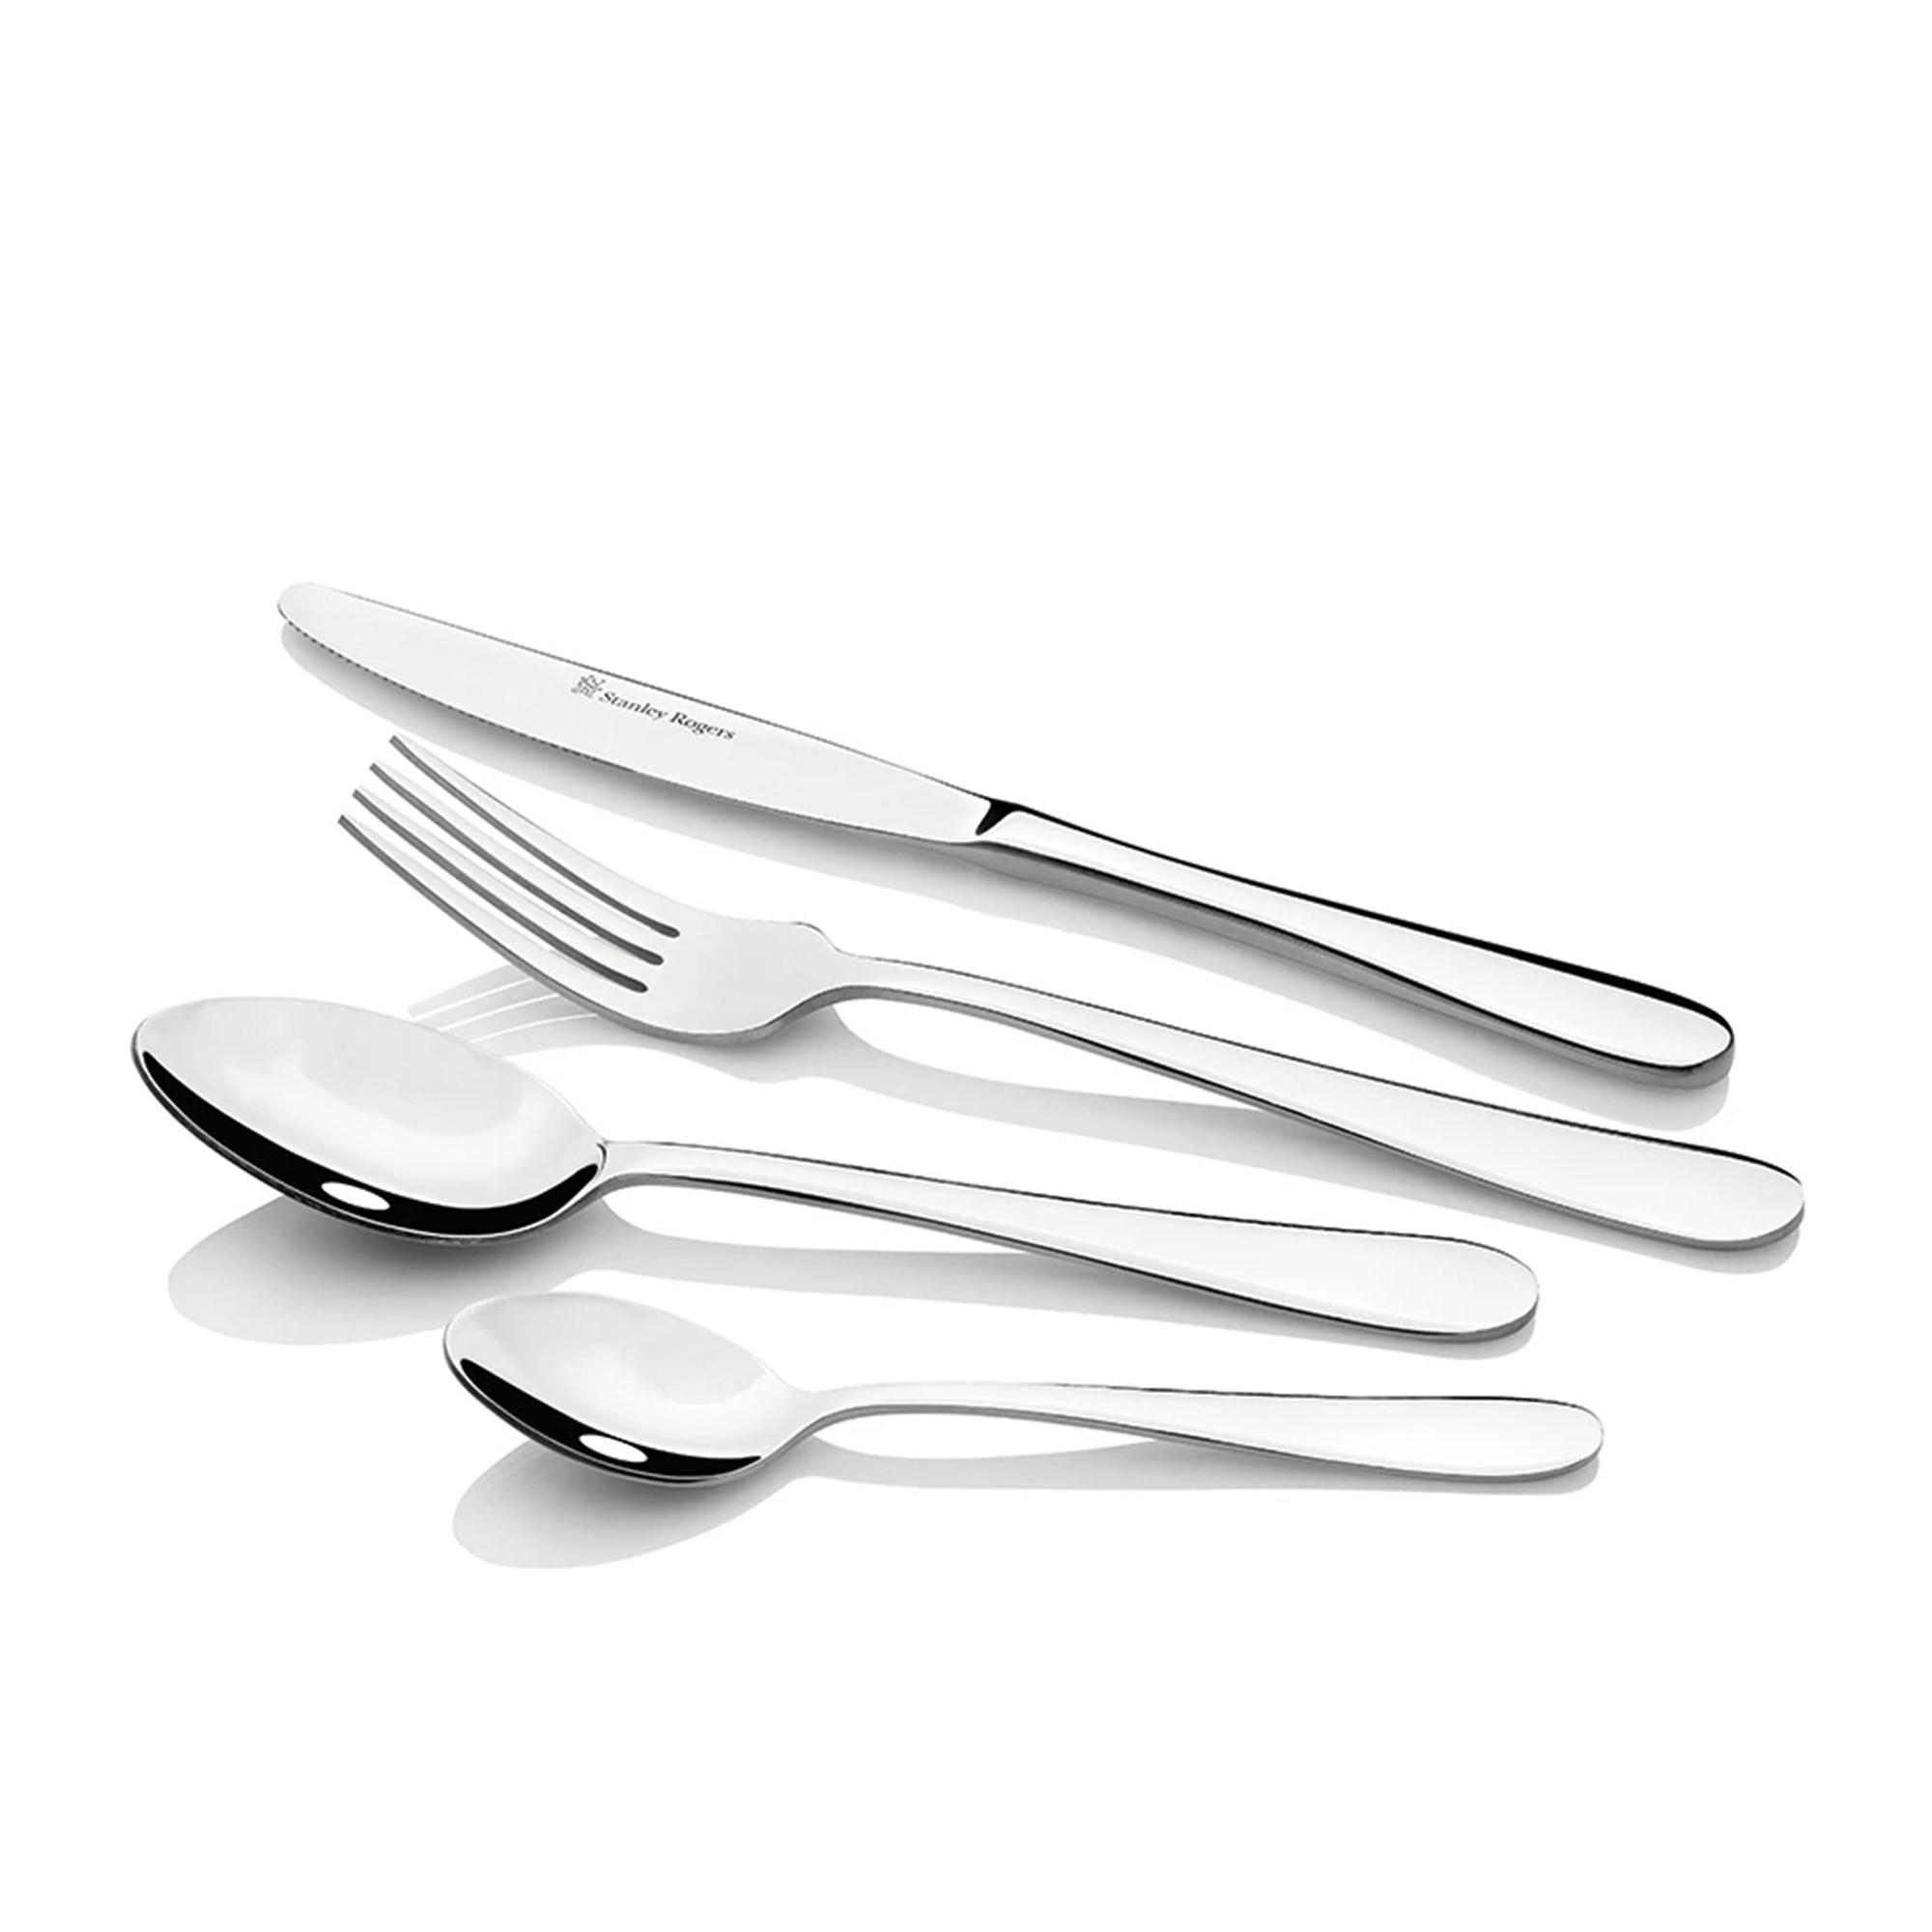 Stanley Rogers Albany Cutlery Set 70pc Image 3